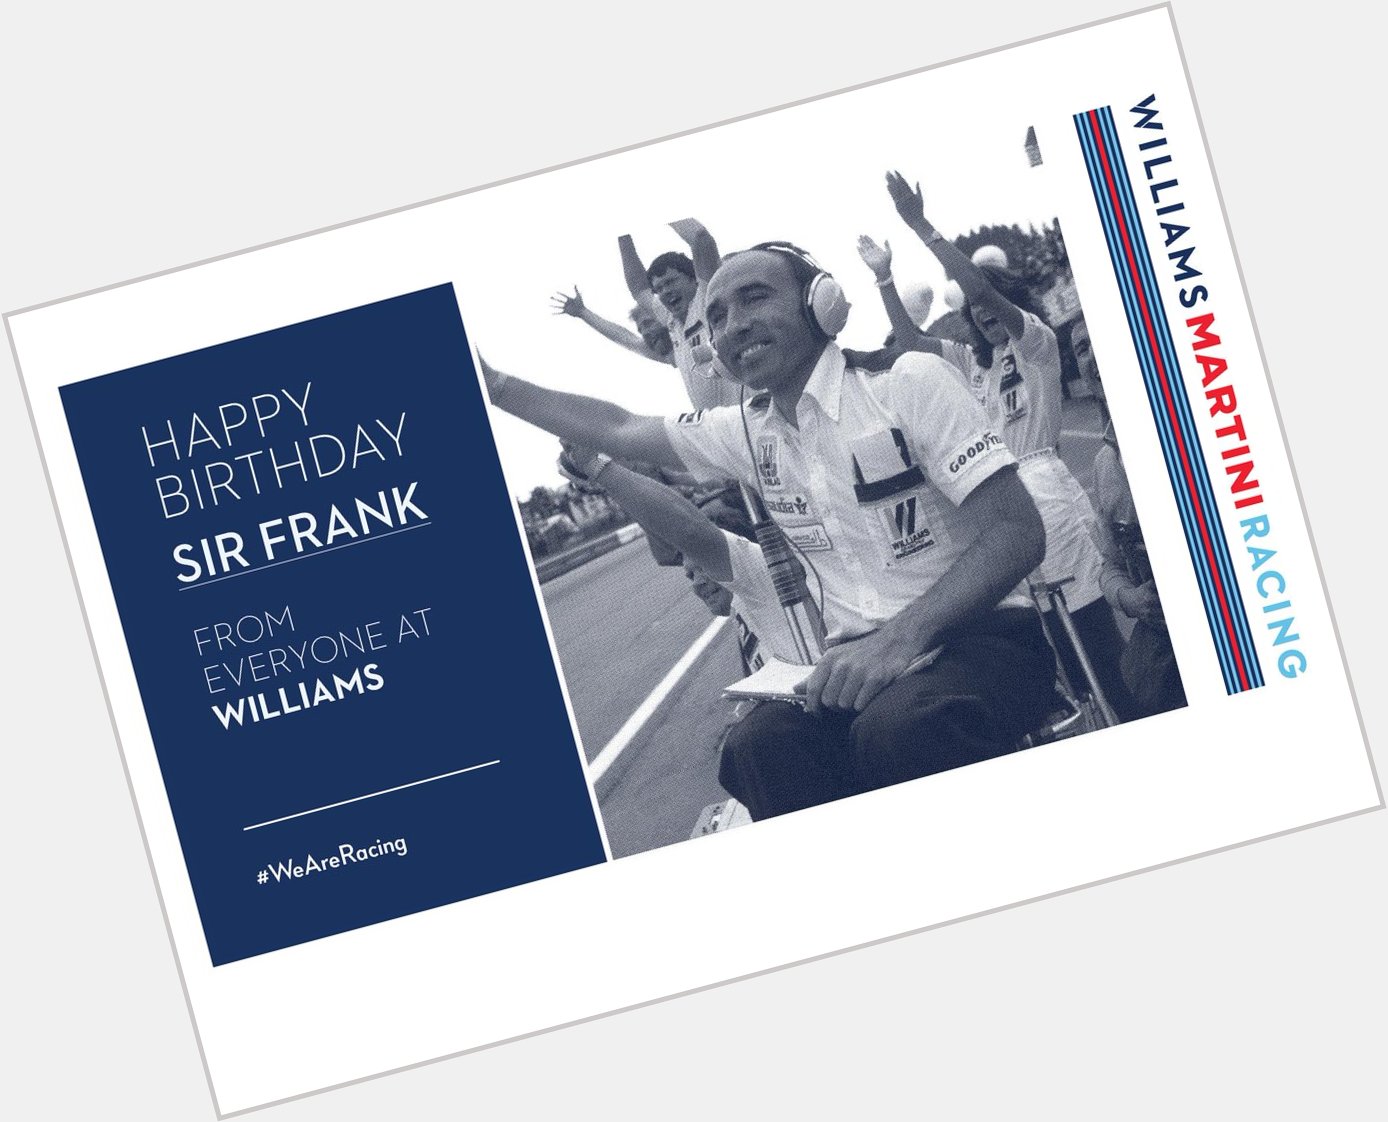 ¡Felicidades Frank Williams! us in wishing our boss and leader a very Happy Birthday! 